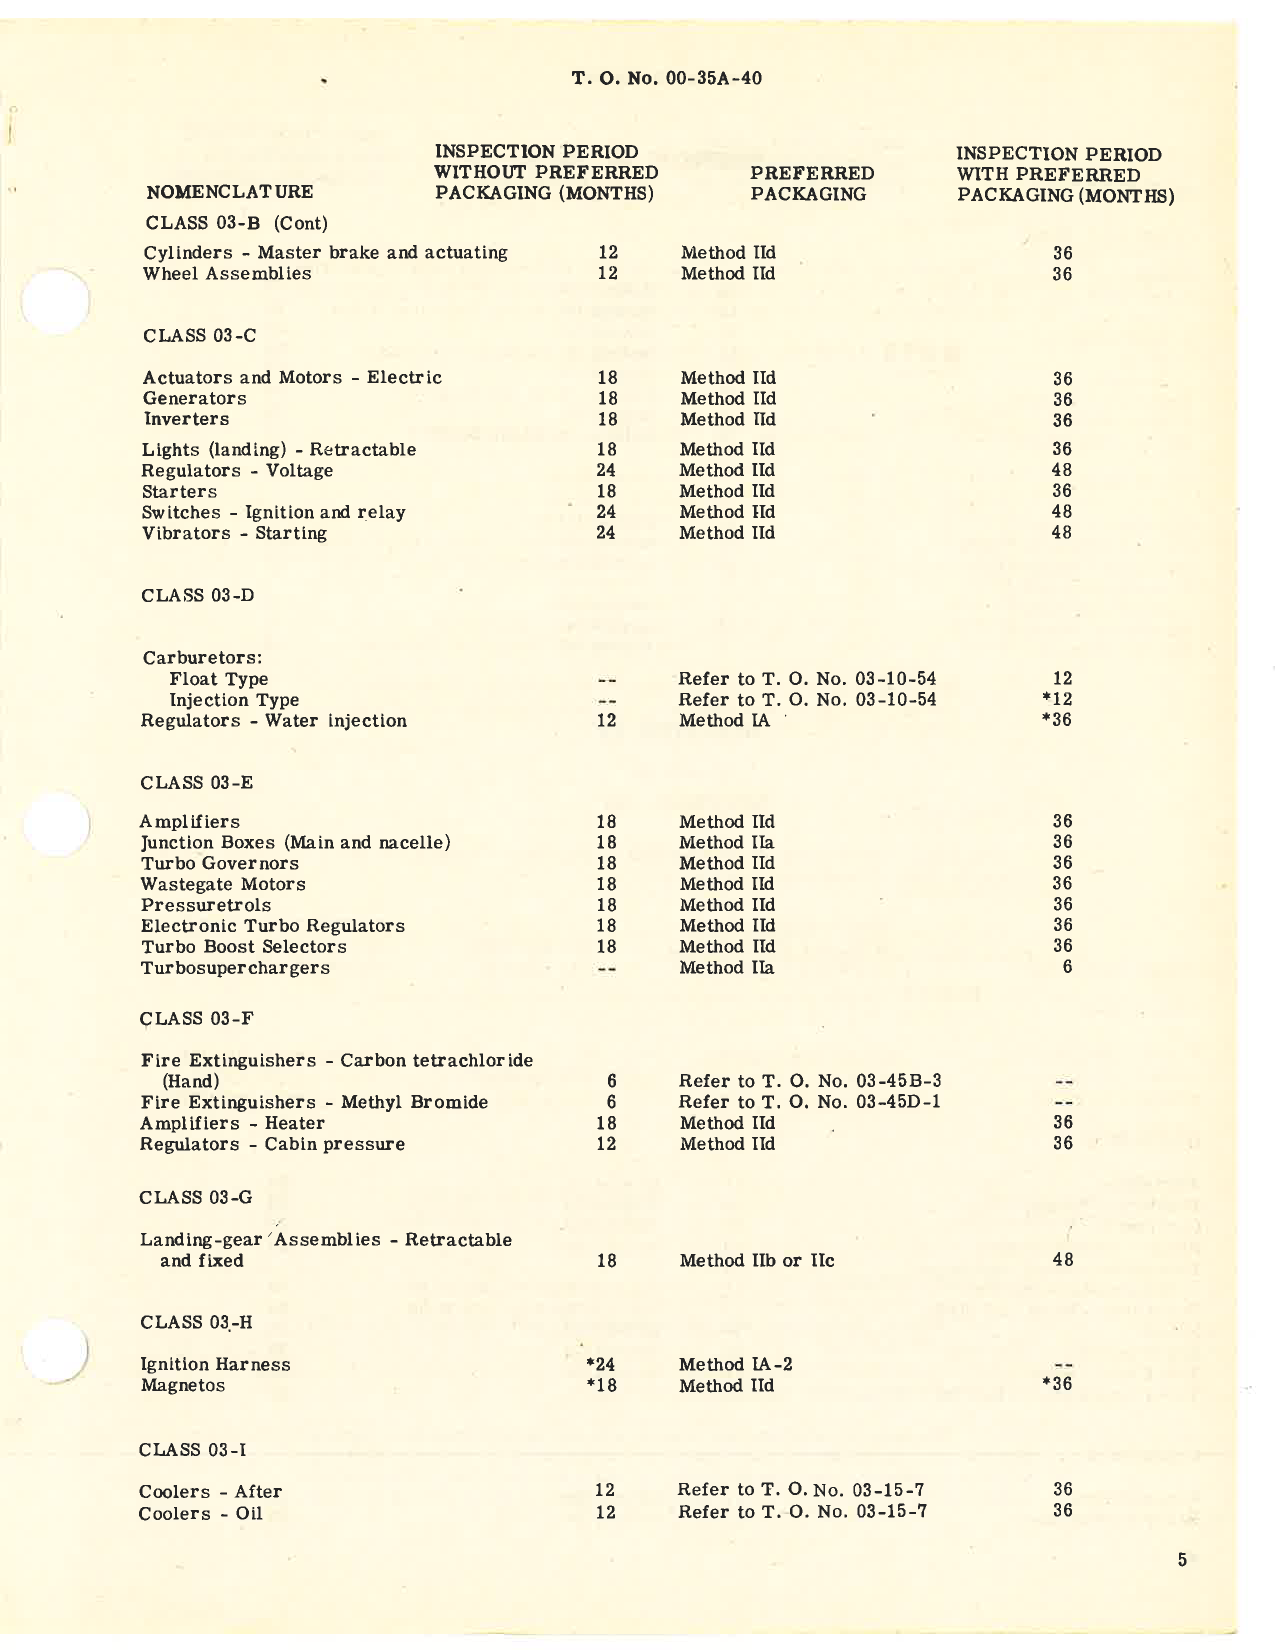 Sample page 7 from AirCorps Library document: Inspection and Functional Test of AAF Material and Equipment in Storage